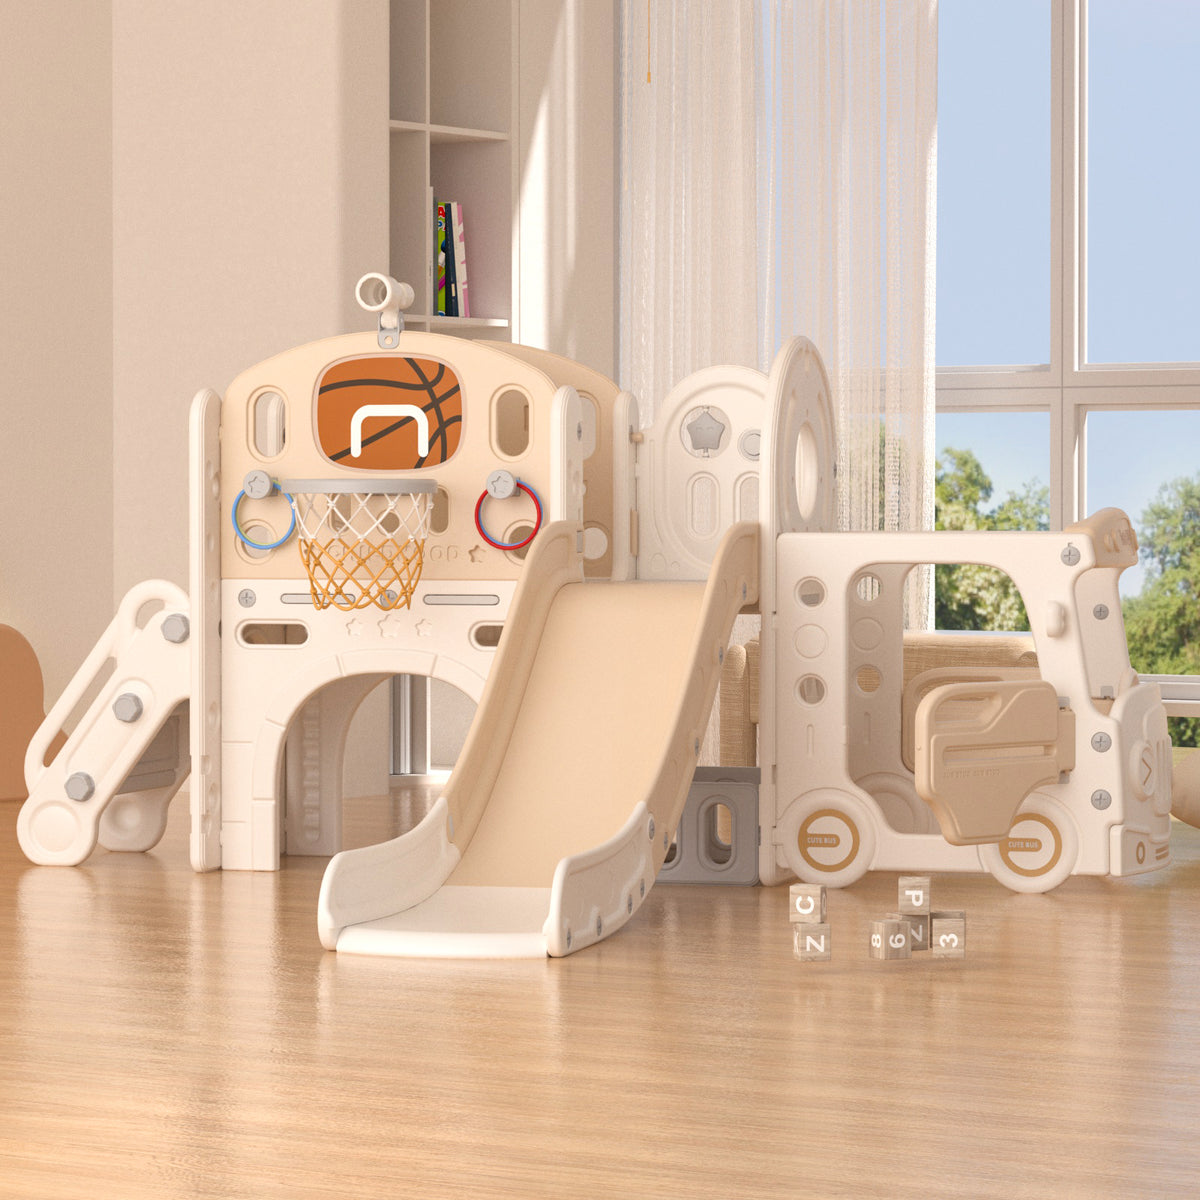 XJD 10-in-1 Toddler Slide Set Freestanding Climber Playset with Basketball Hoop and Ball Versatile Playset for Kids, Beige Coffee